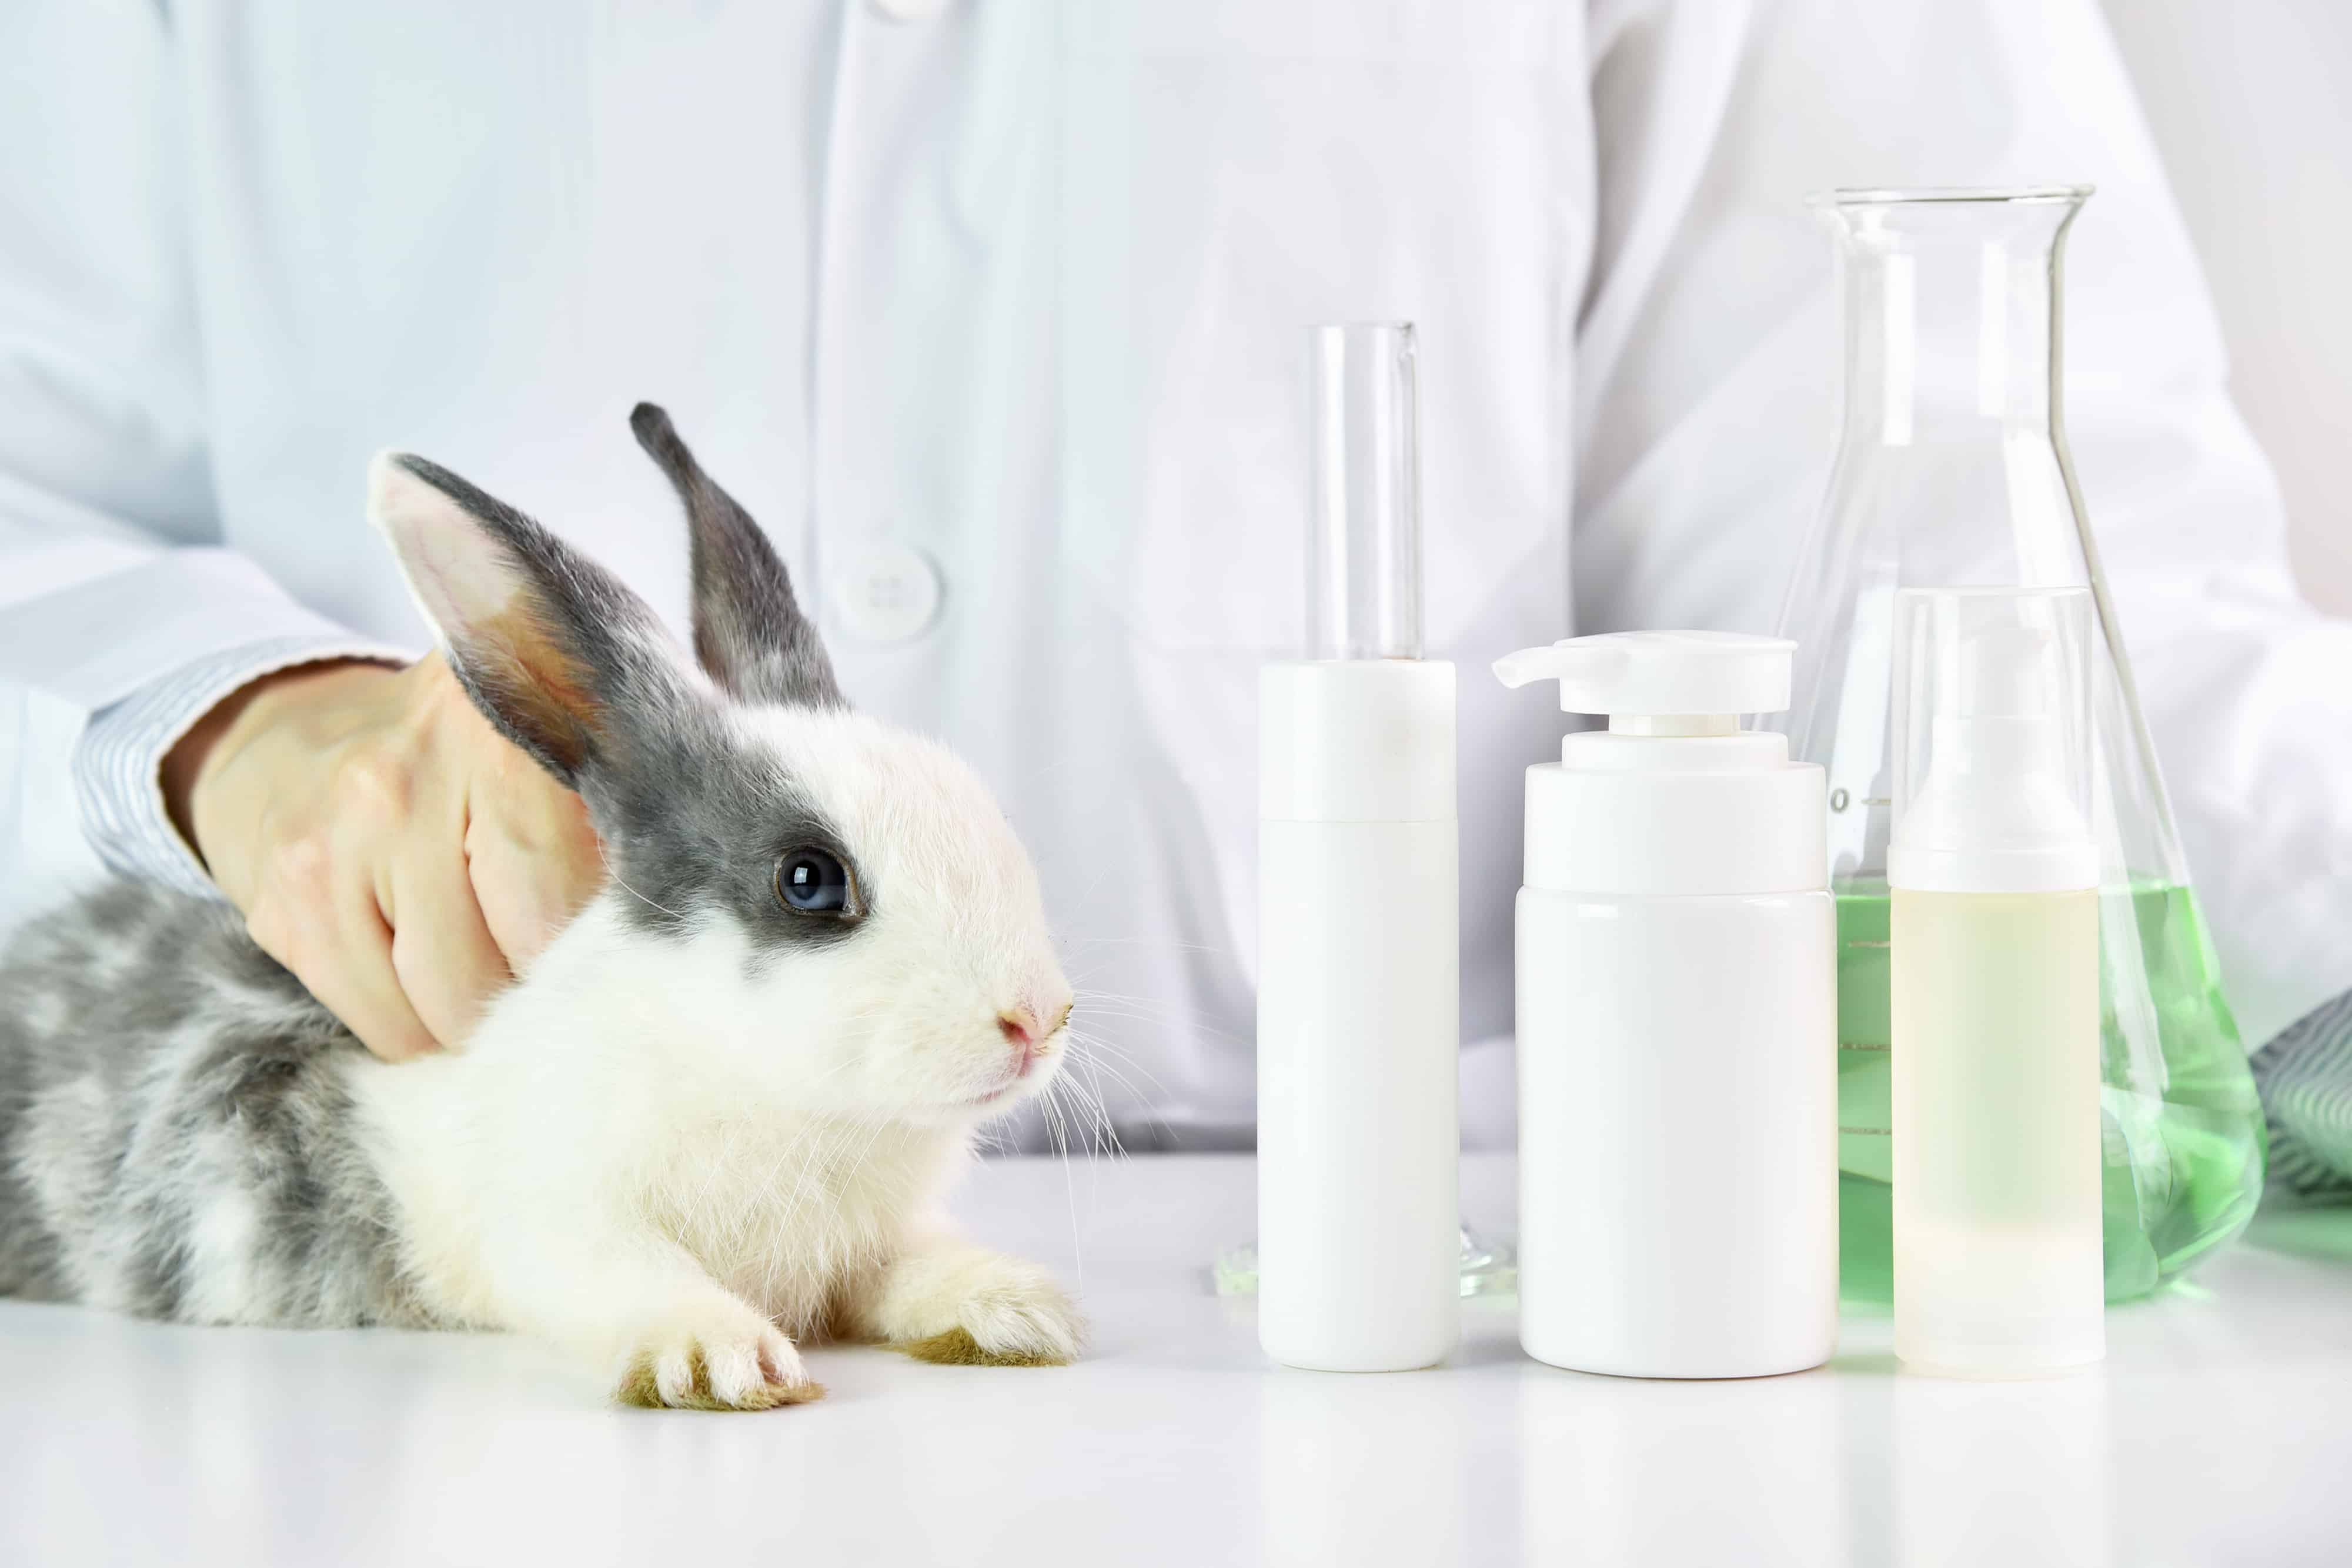 Animal testing in a lab